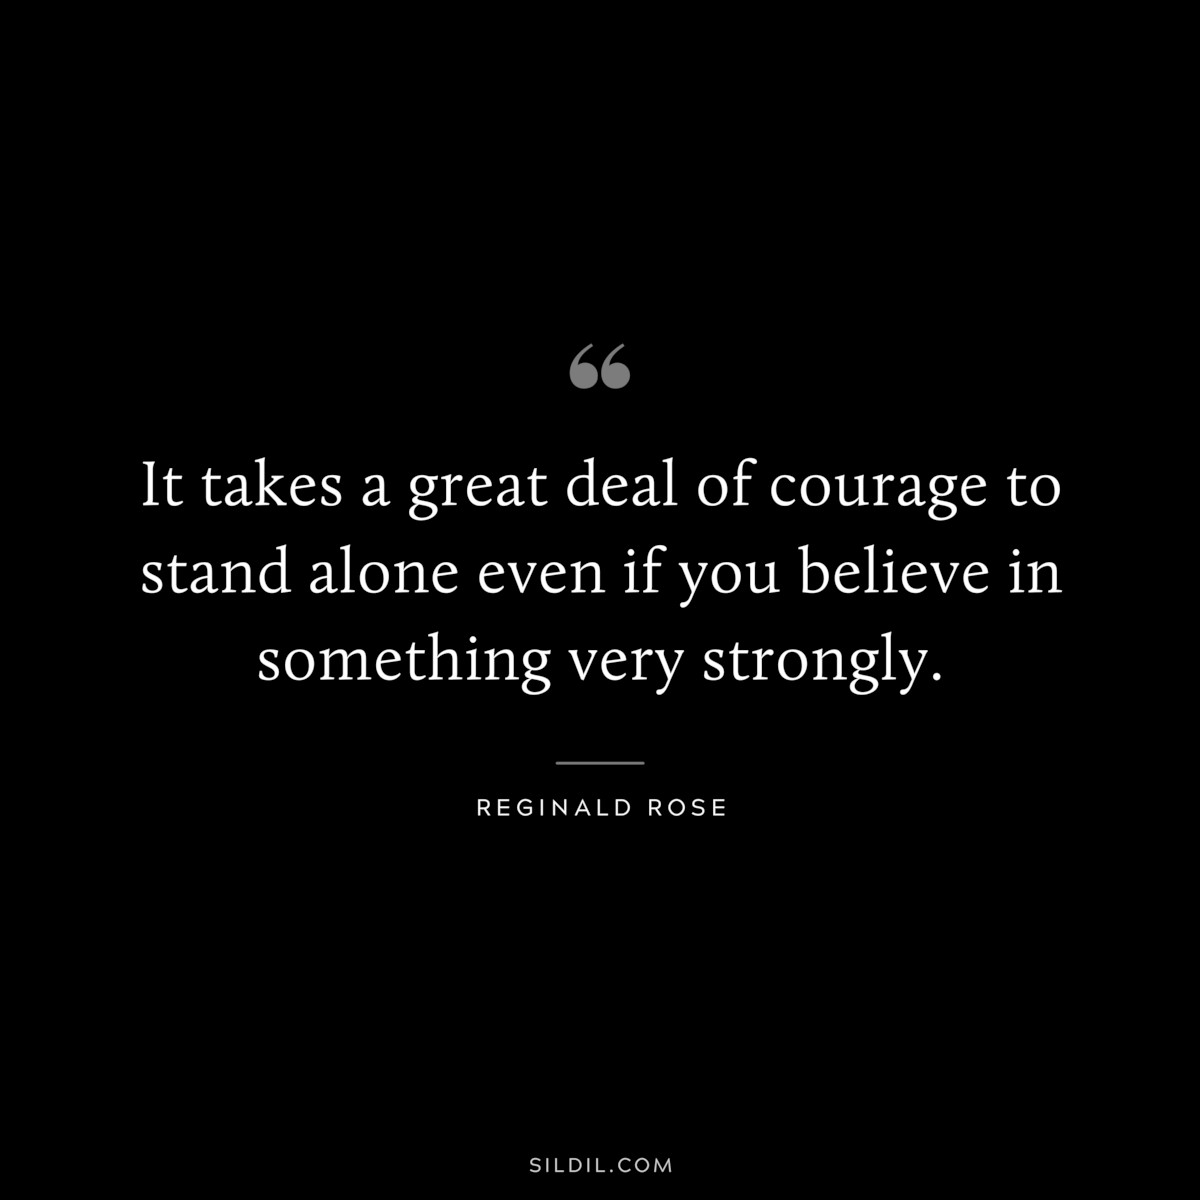 It takes a great deal of courage to stand alone even if you believe in something very strongly. ― Reginald Rose